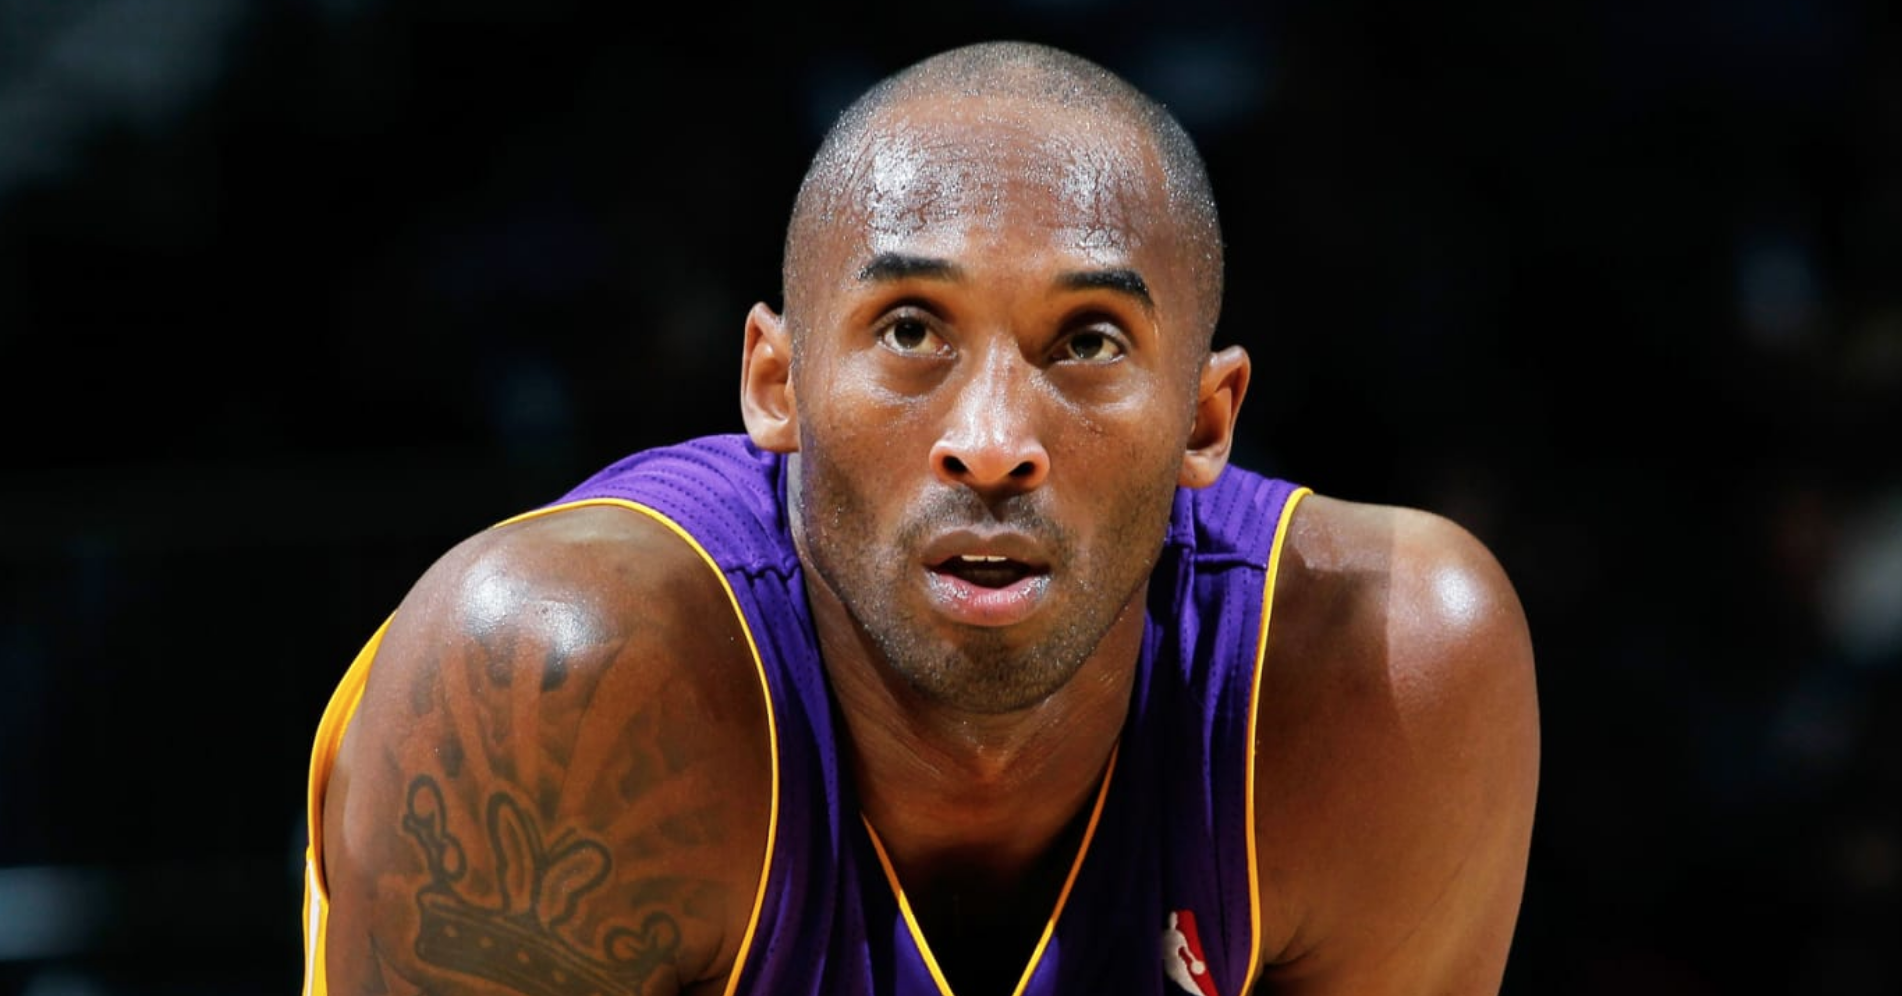 Kobe Bryant dies in a helicopter crash, others dead